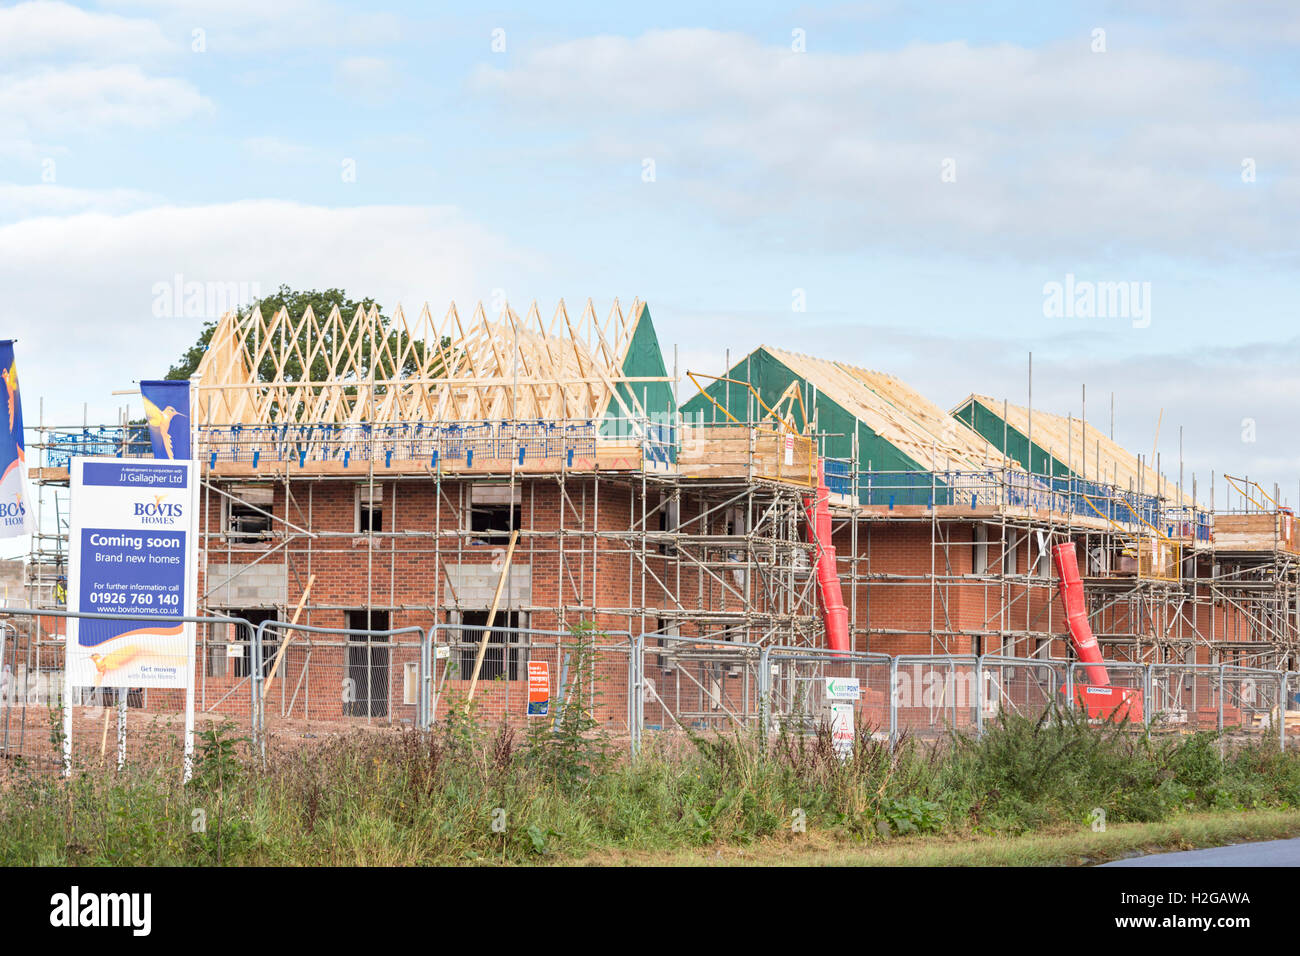 New housing by Bovis Homes, England, UK Stock Photo